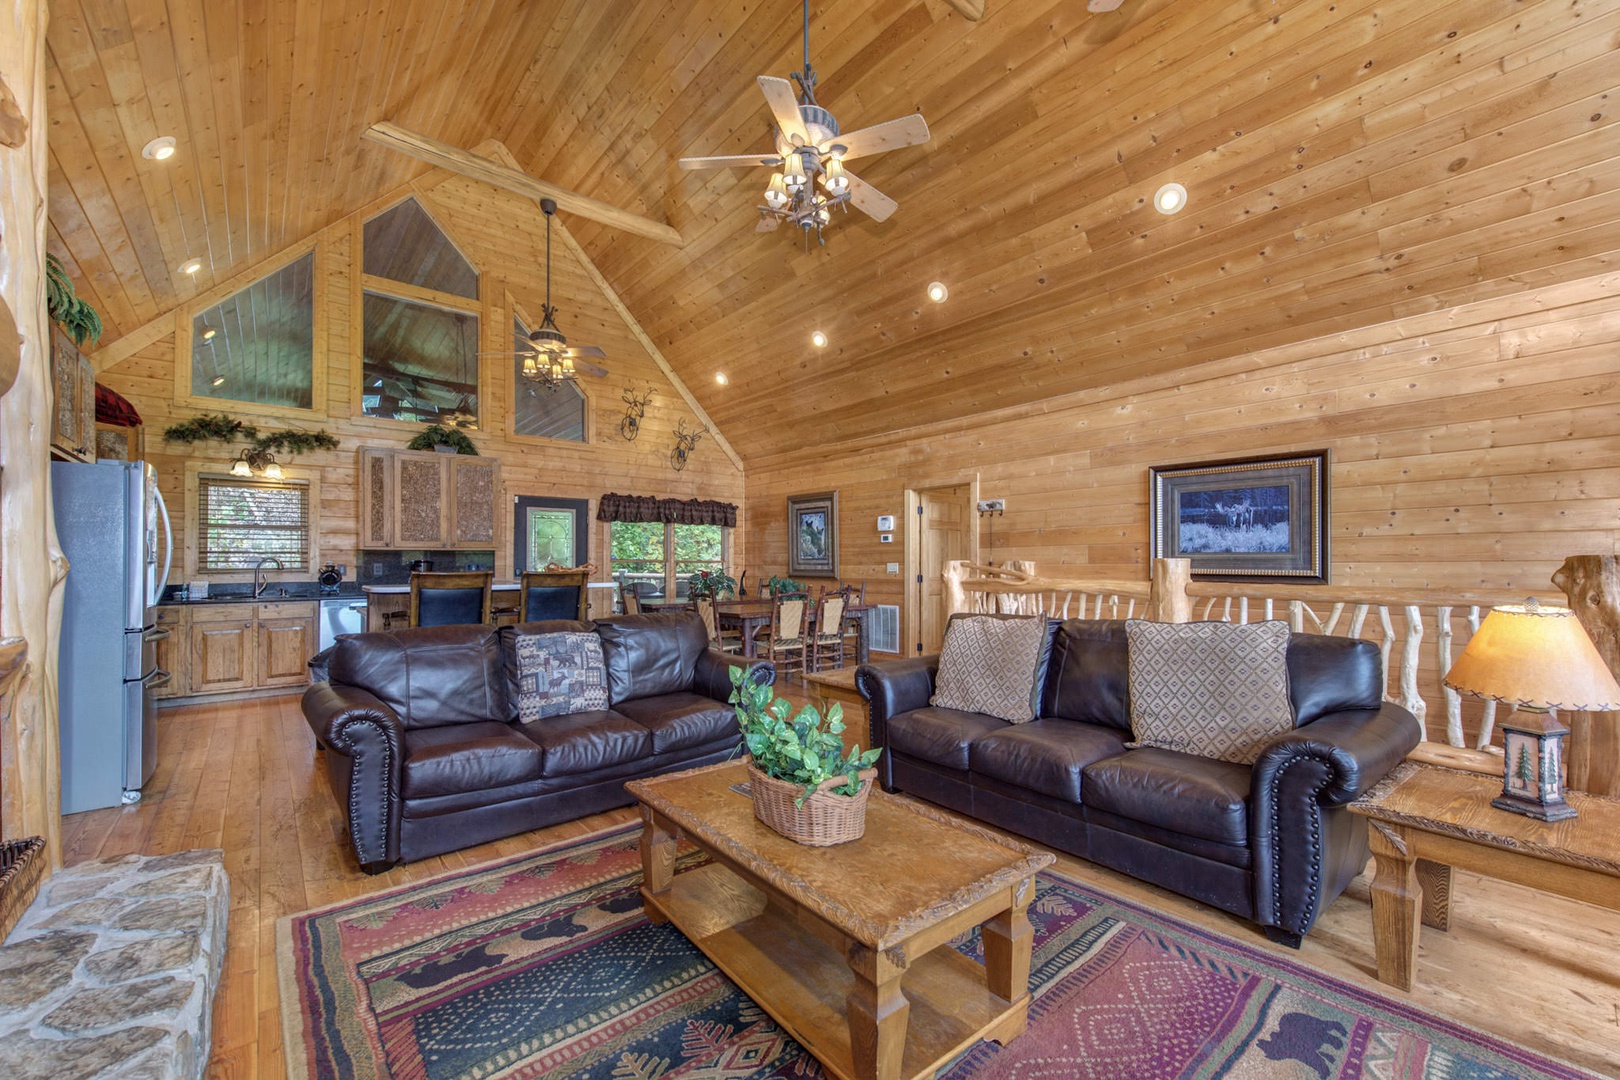 Gather around in the spacious living room with ample seating, gas fireplace, and Smart TV